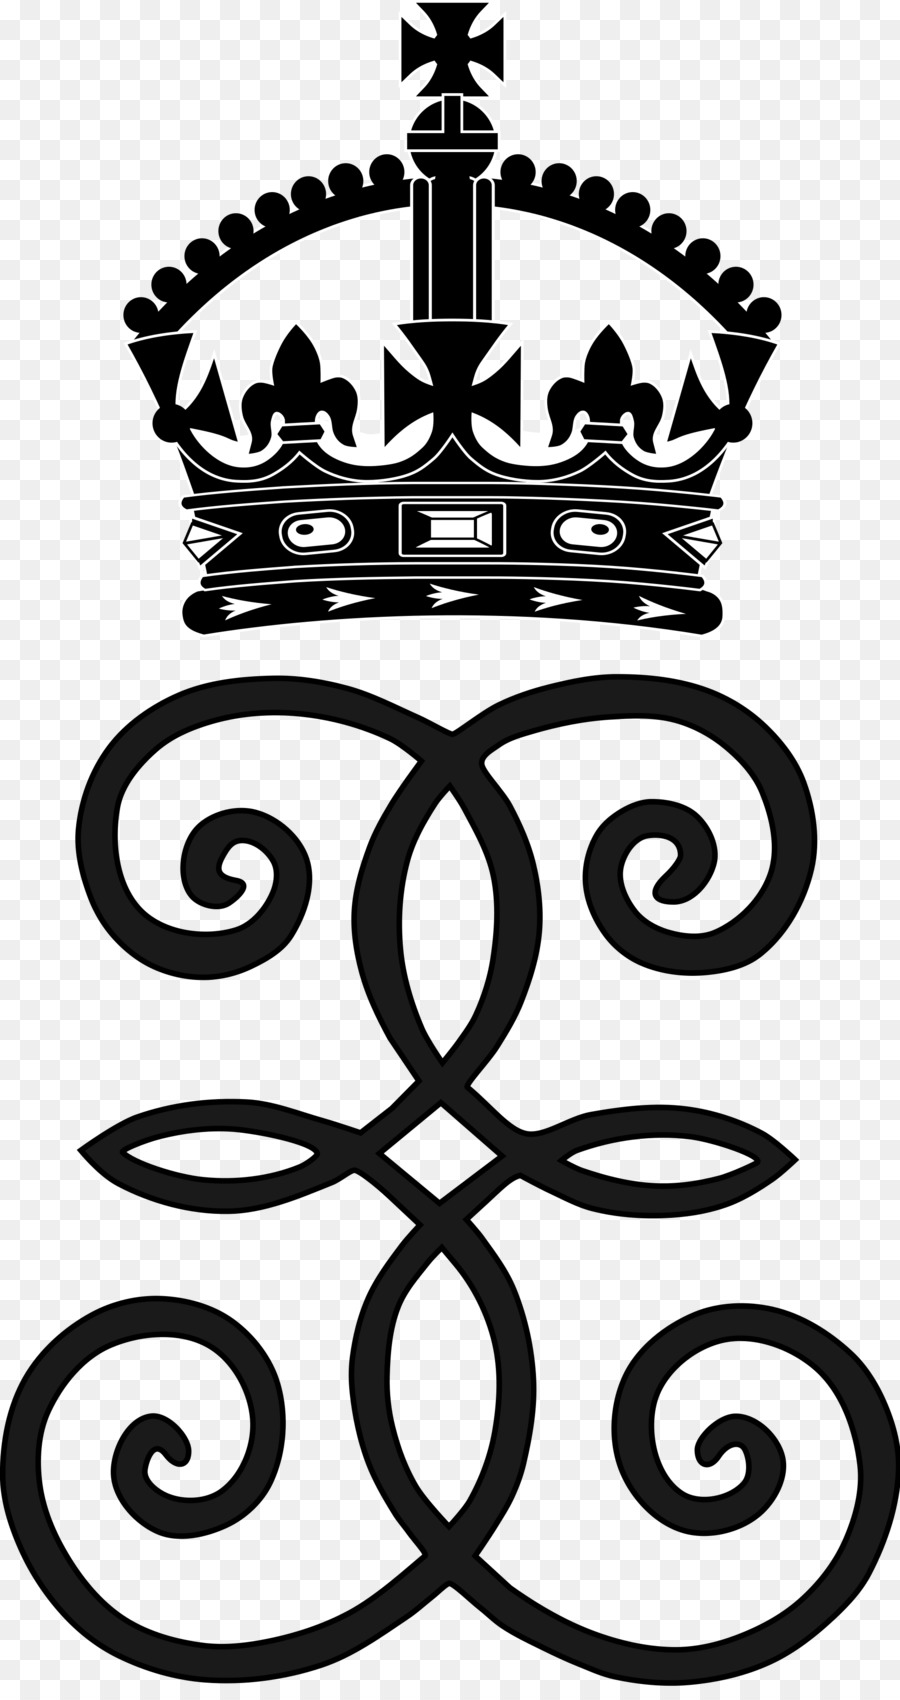 Royal cypher United Kingdom Crown of Queen Elizabeth The Queen Mother Monarch - united kingdom png download - 2000*3752 - Free Transparent Royal Cypher png Download.